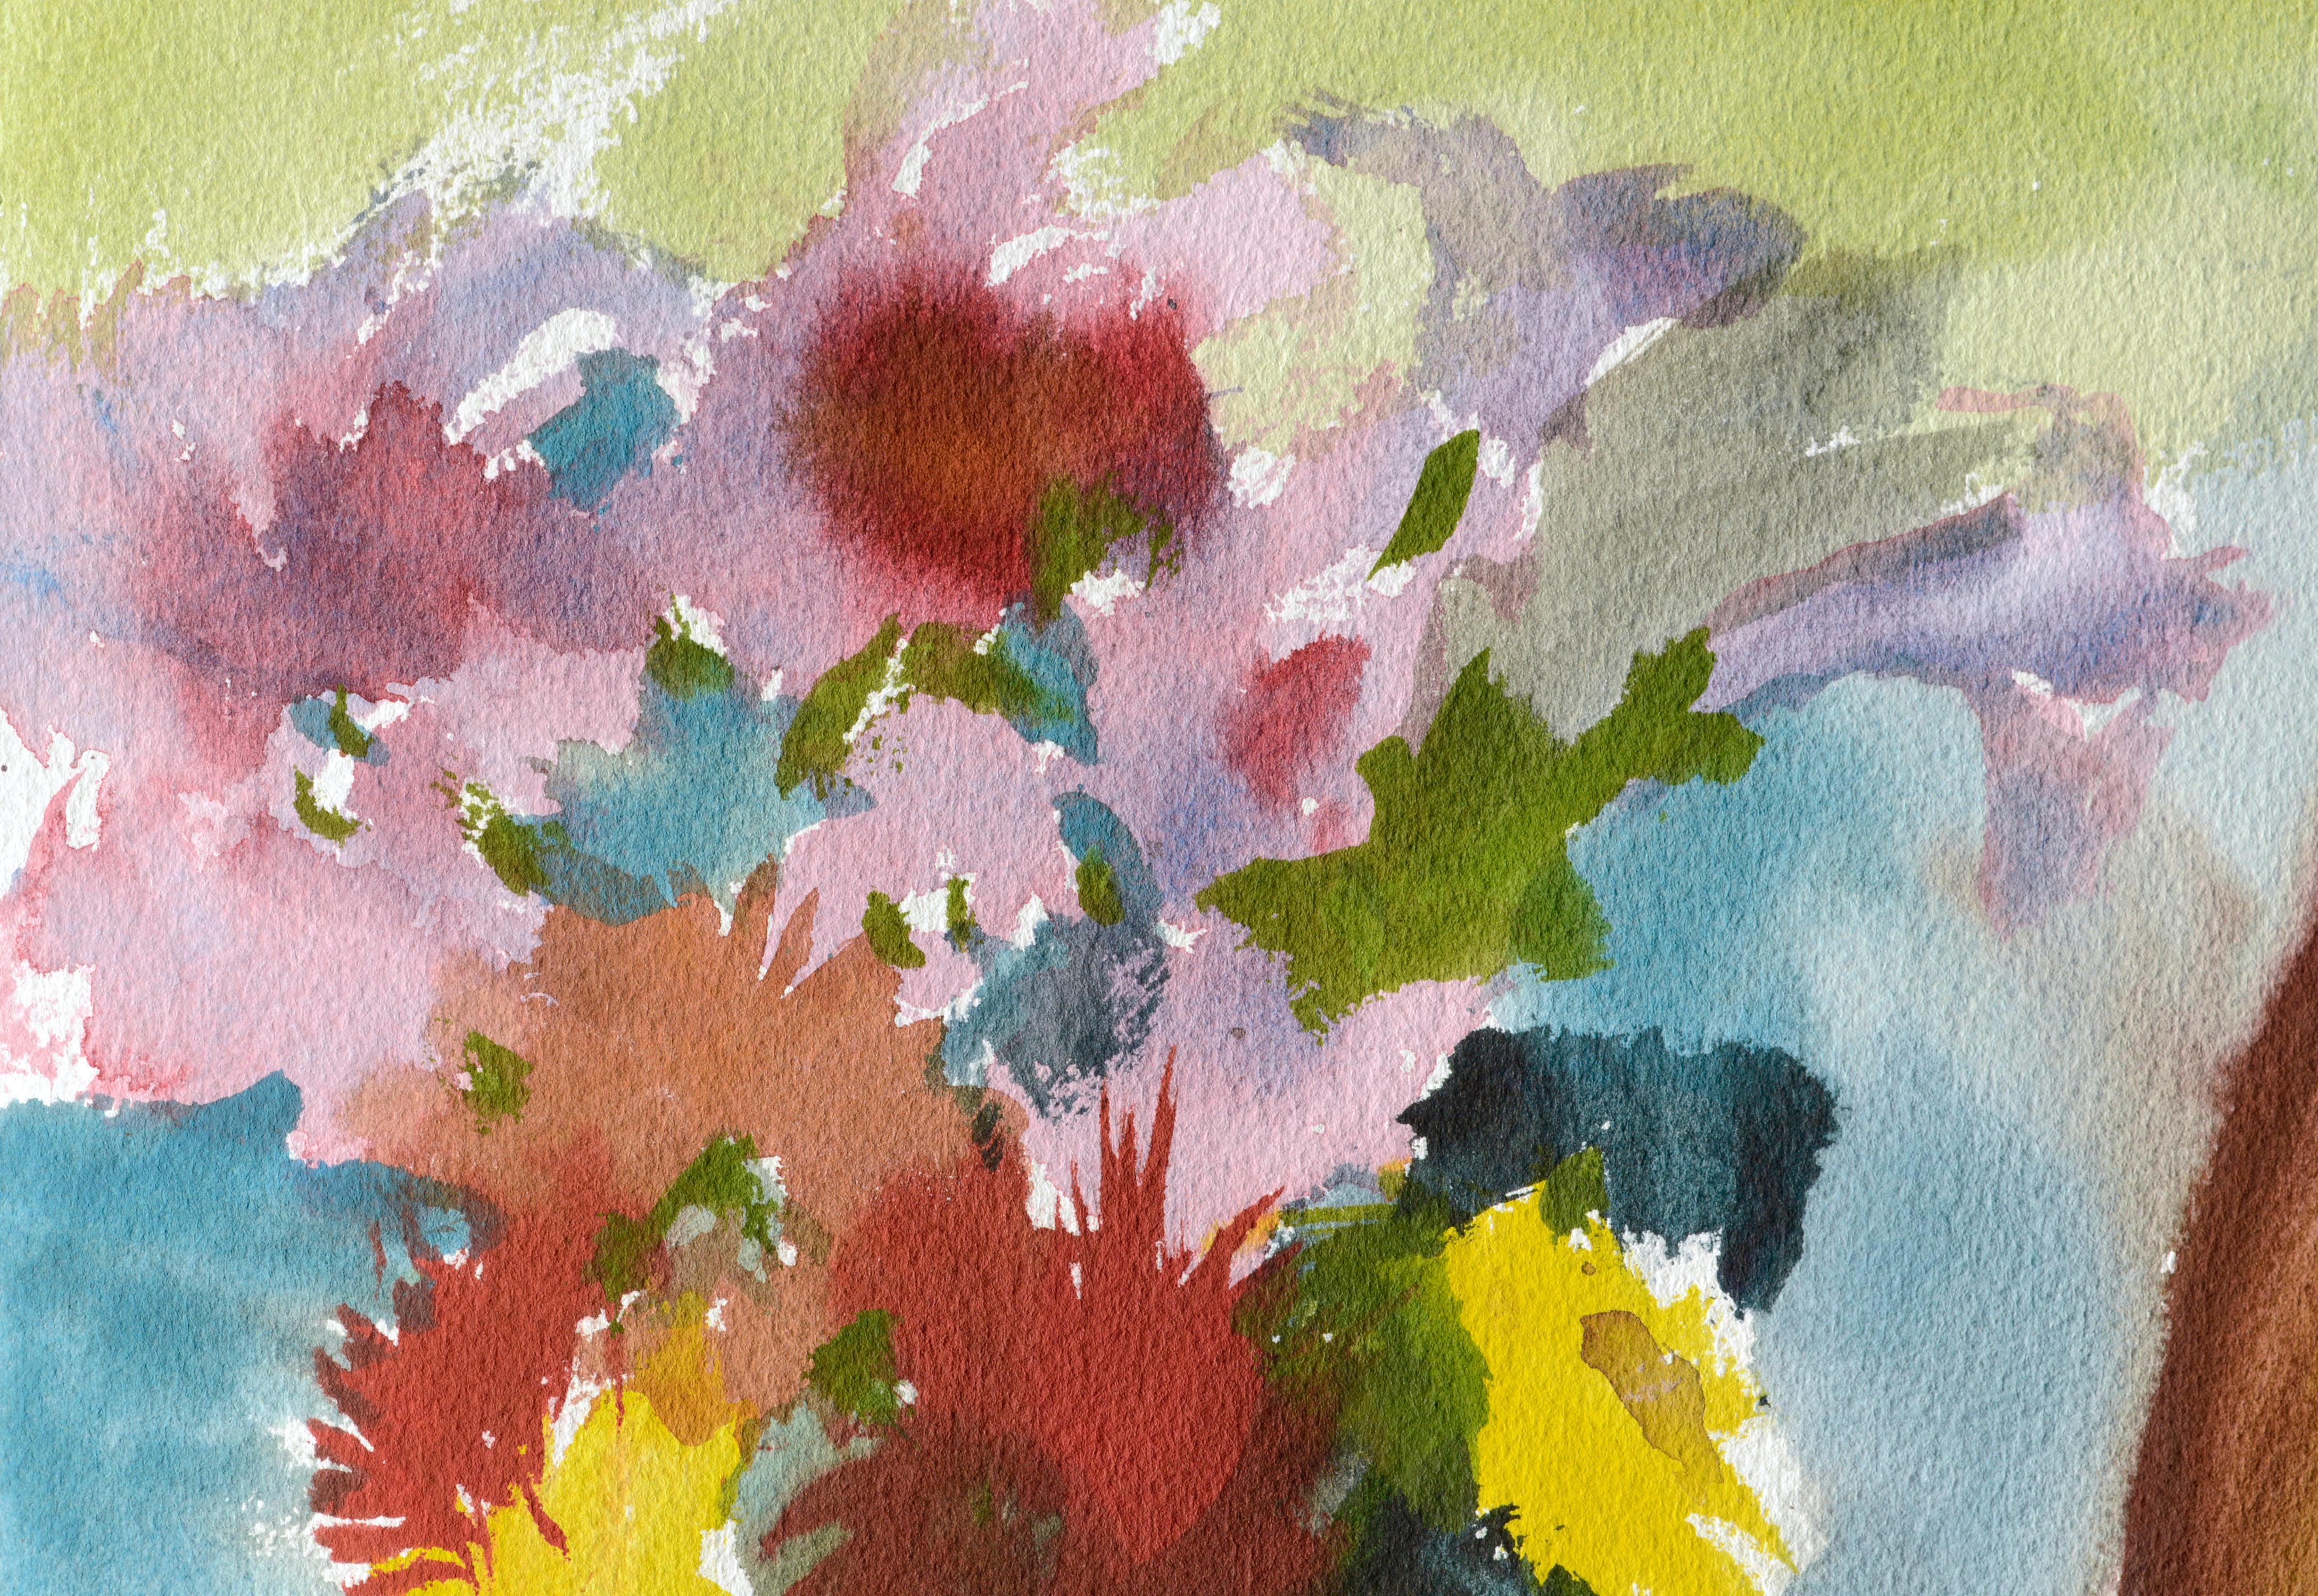 Abstracted Still Life with Flowers - Art by Les Anderson